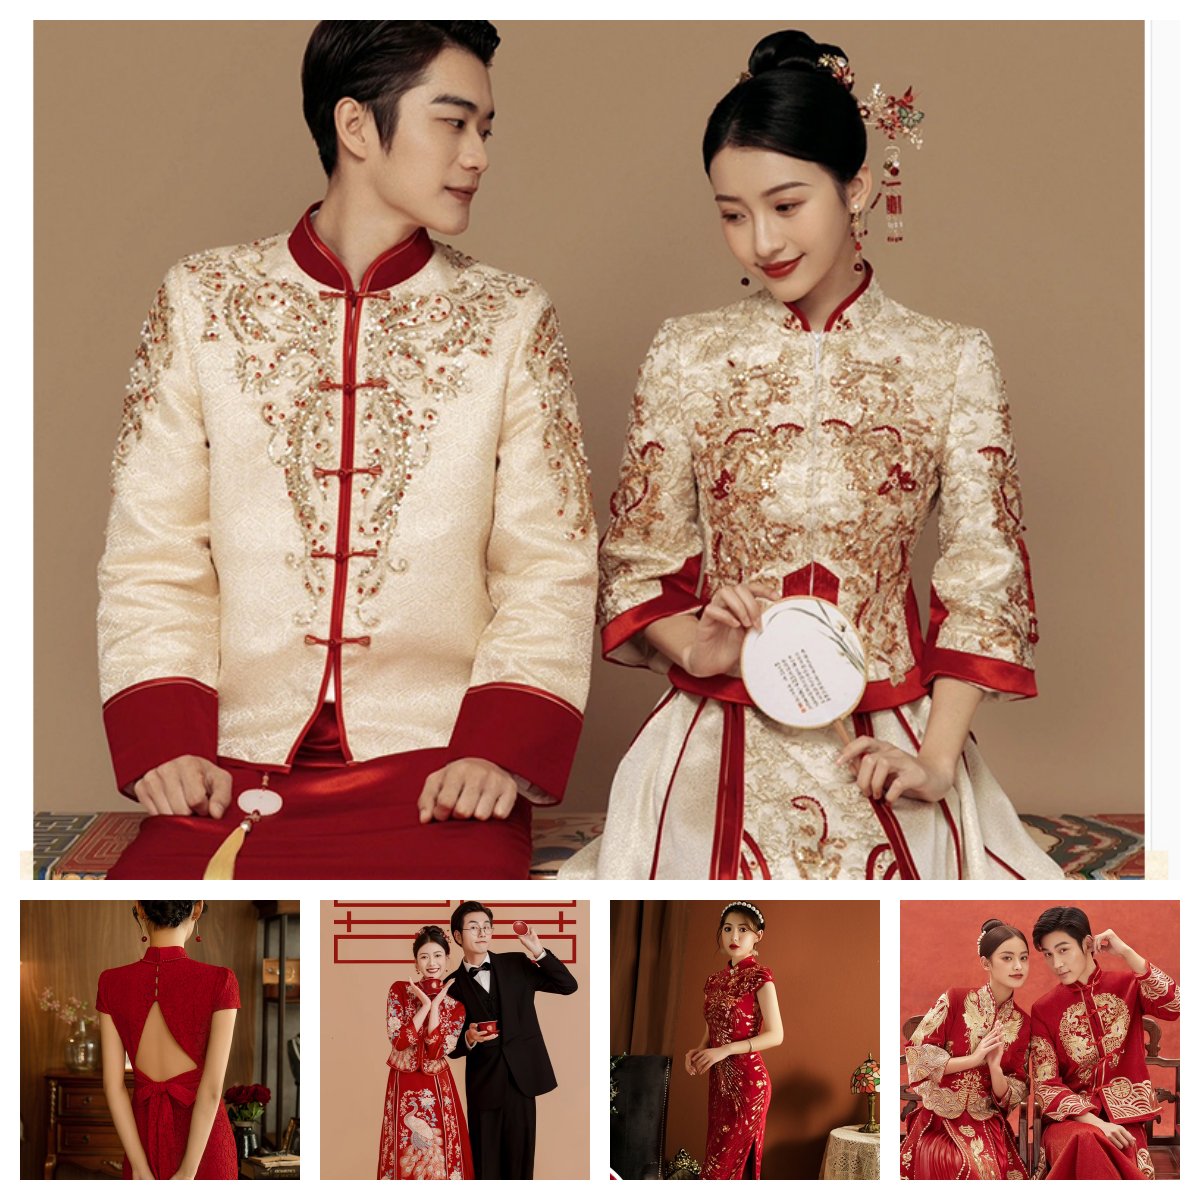 Chinese wedding outfits